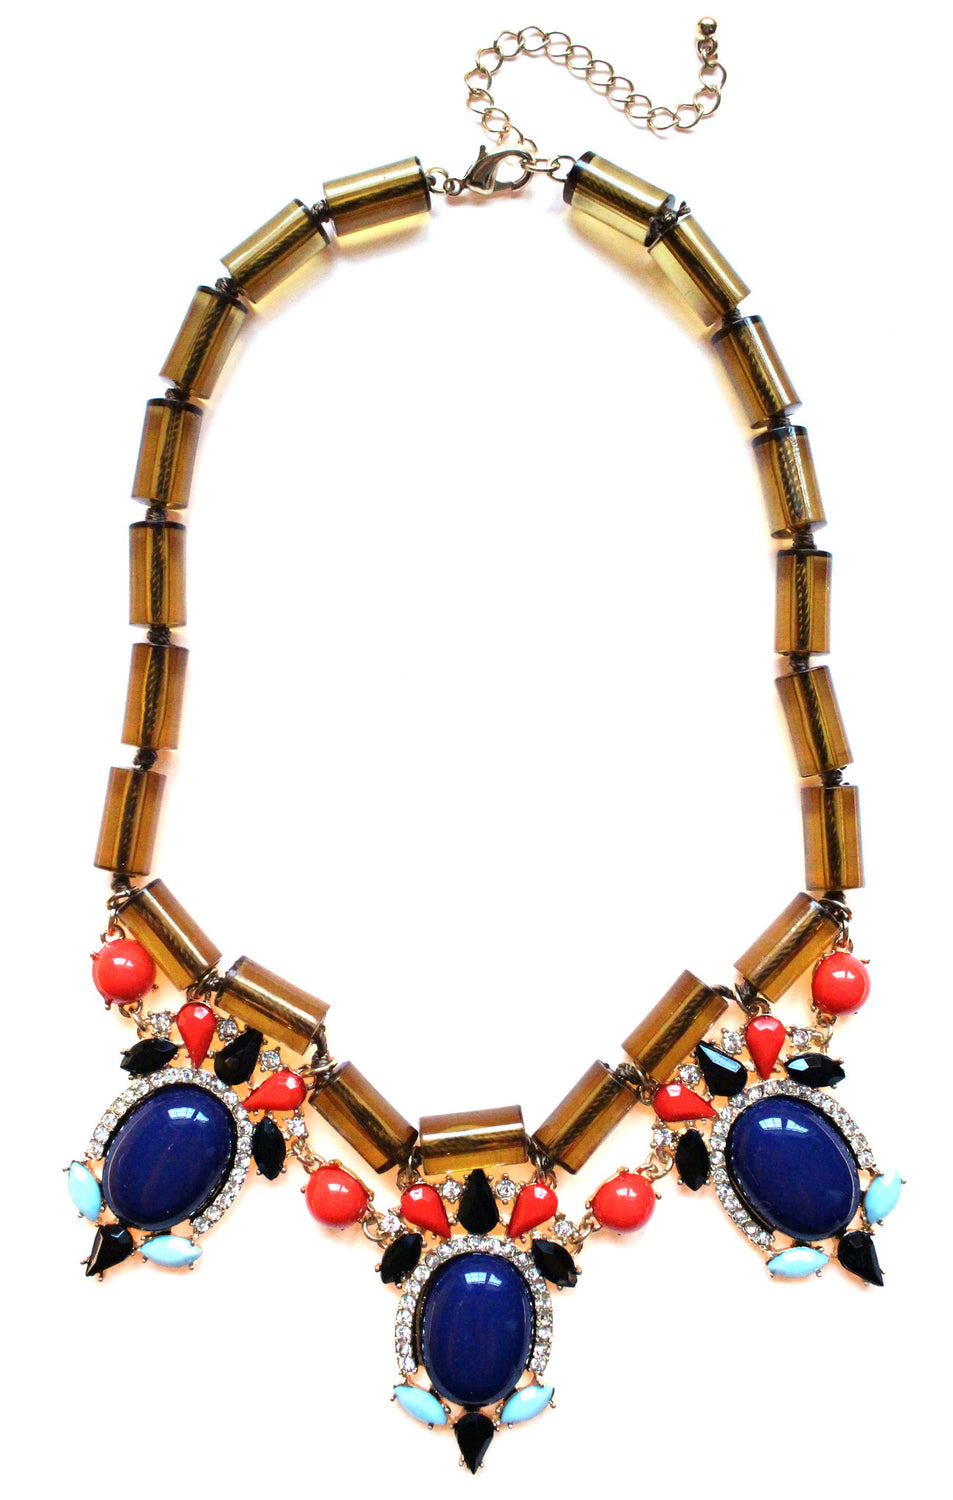 Colorful Beaded & Jeweled Statement Necklace- Brown & Navy